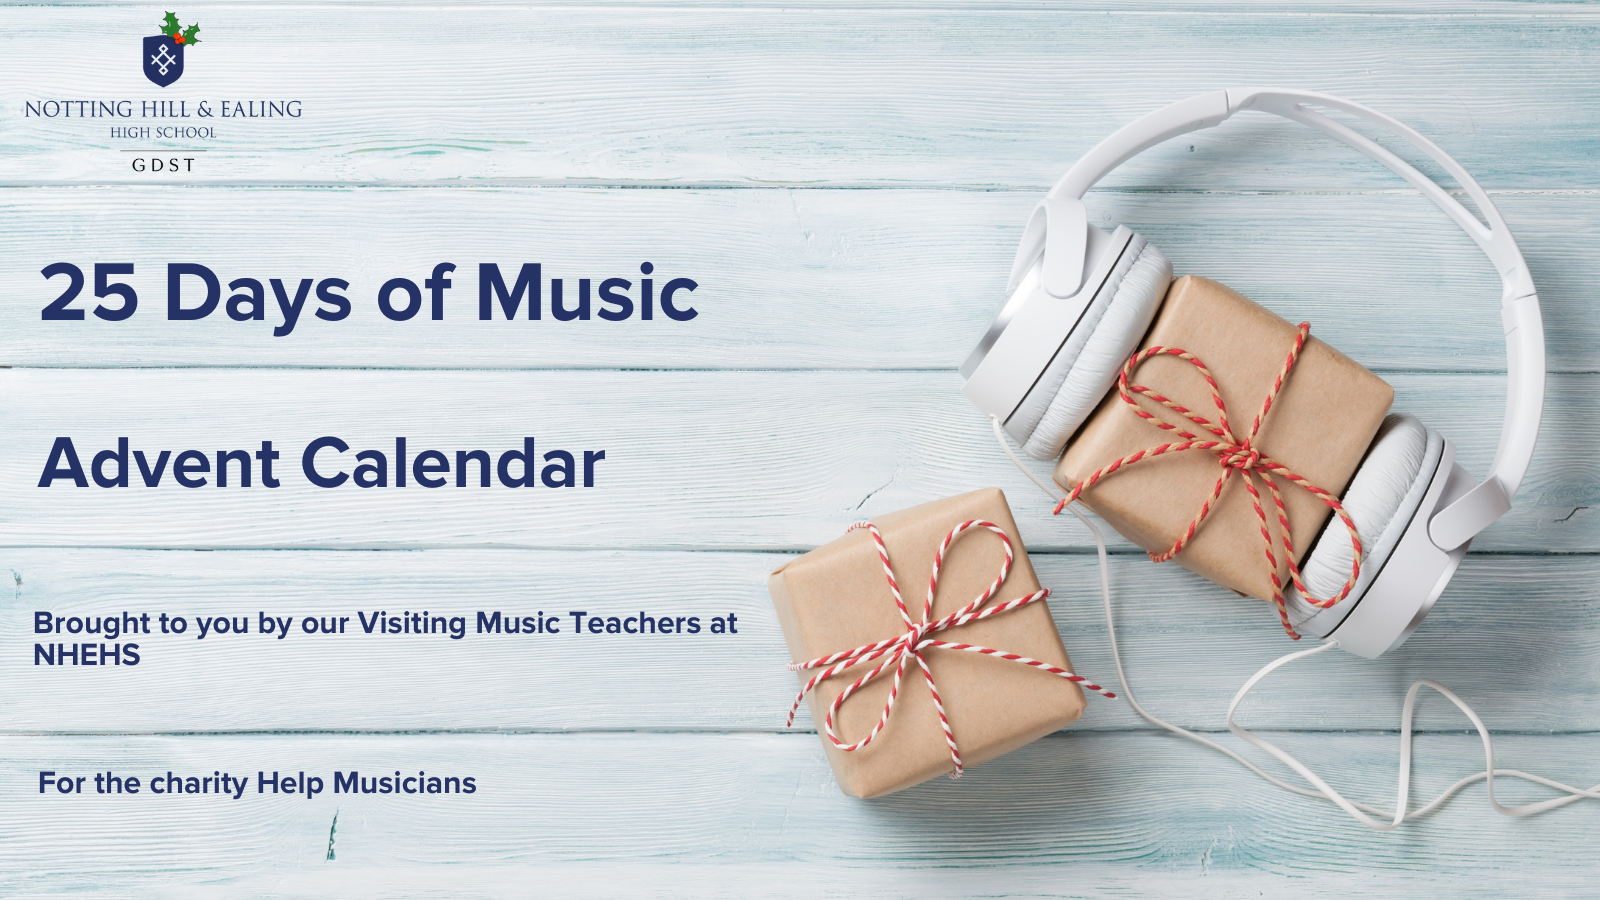 Music Advent Calendar Hits the Right Notes for Musicians' Charity